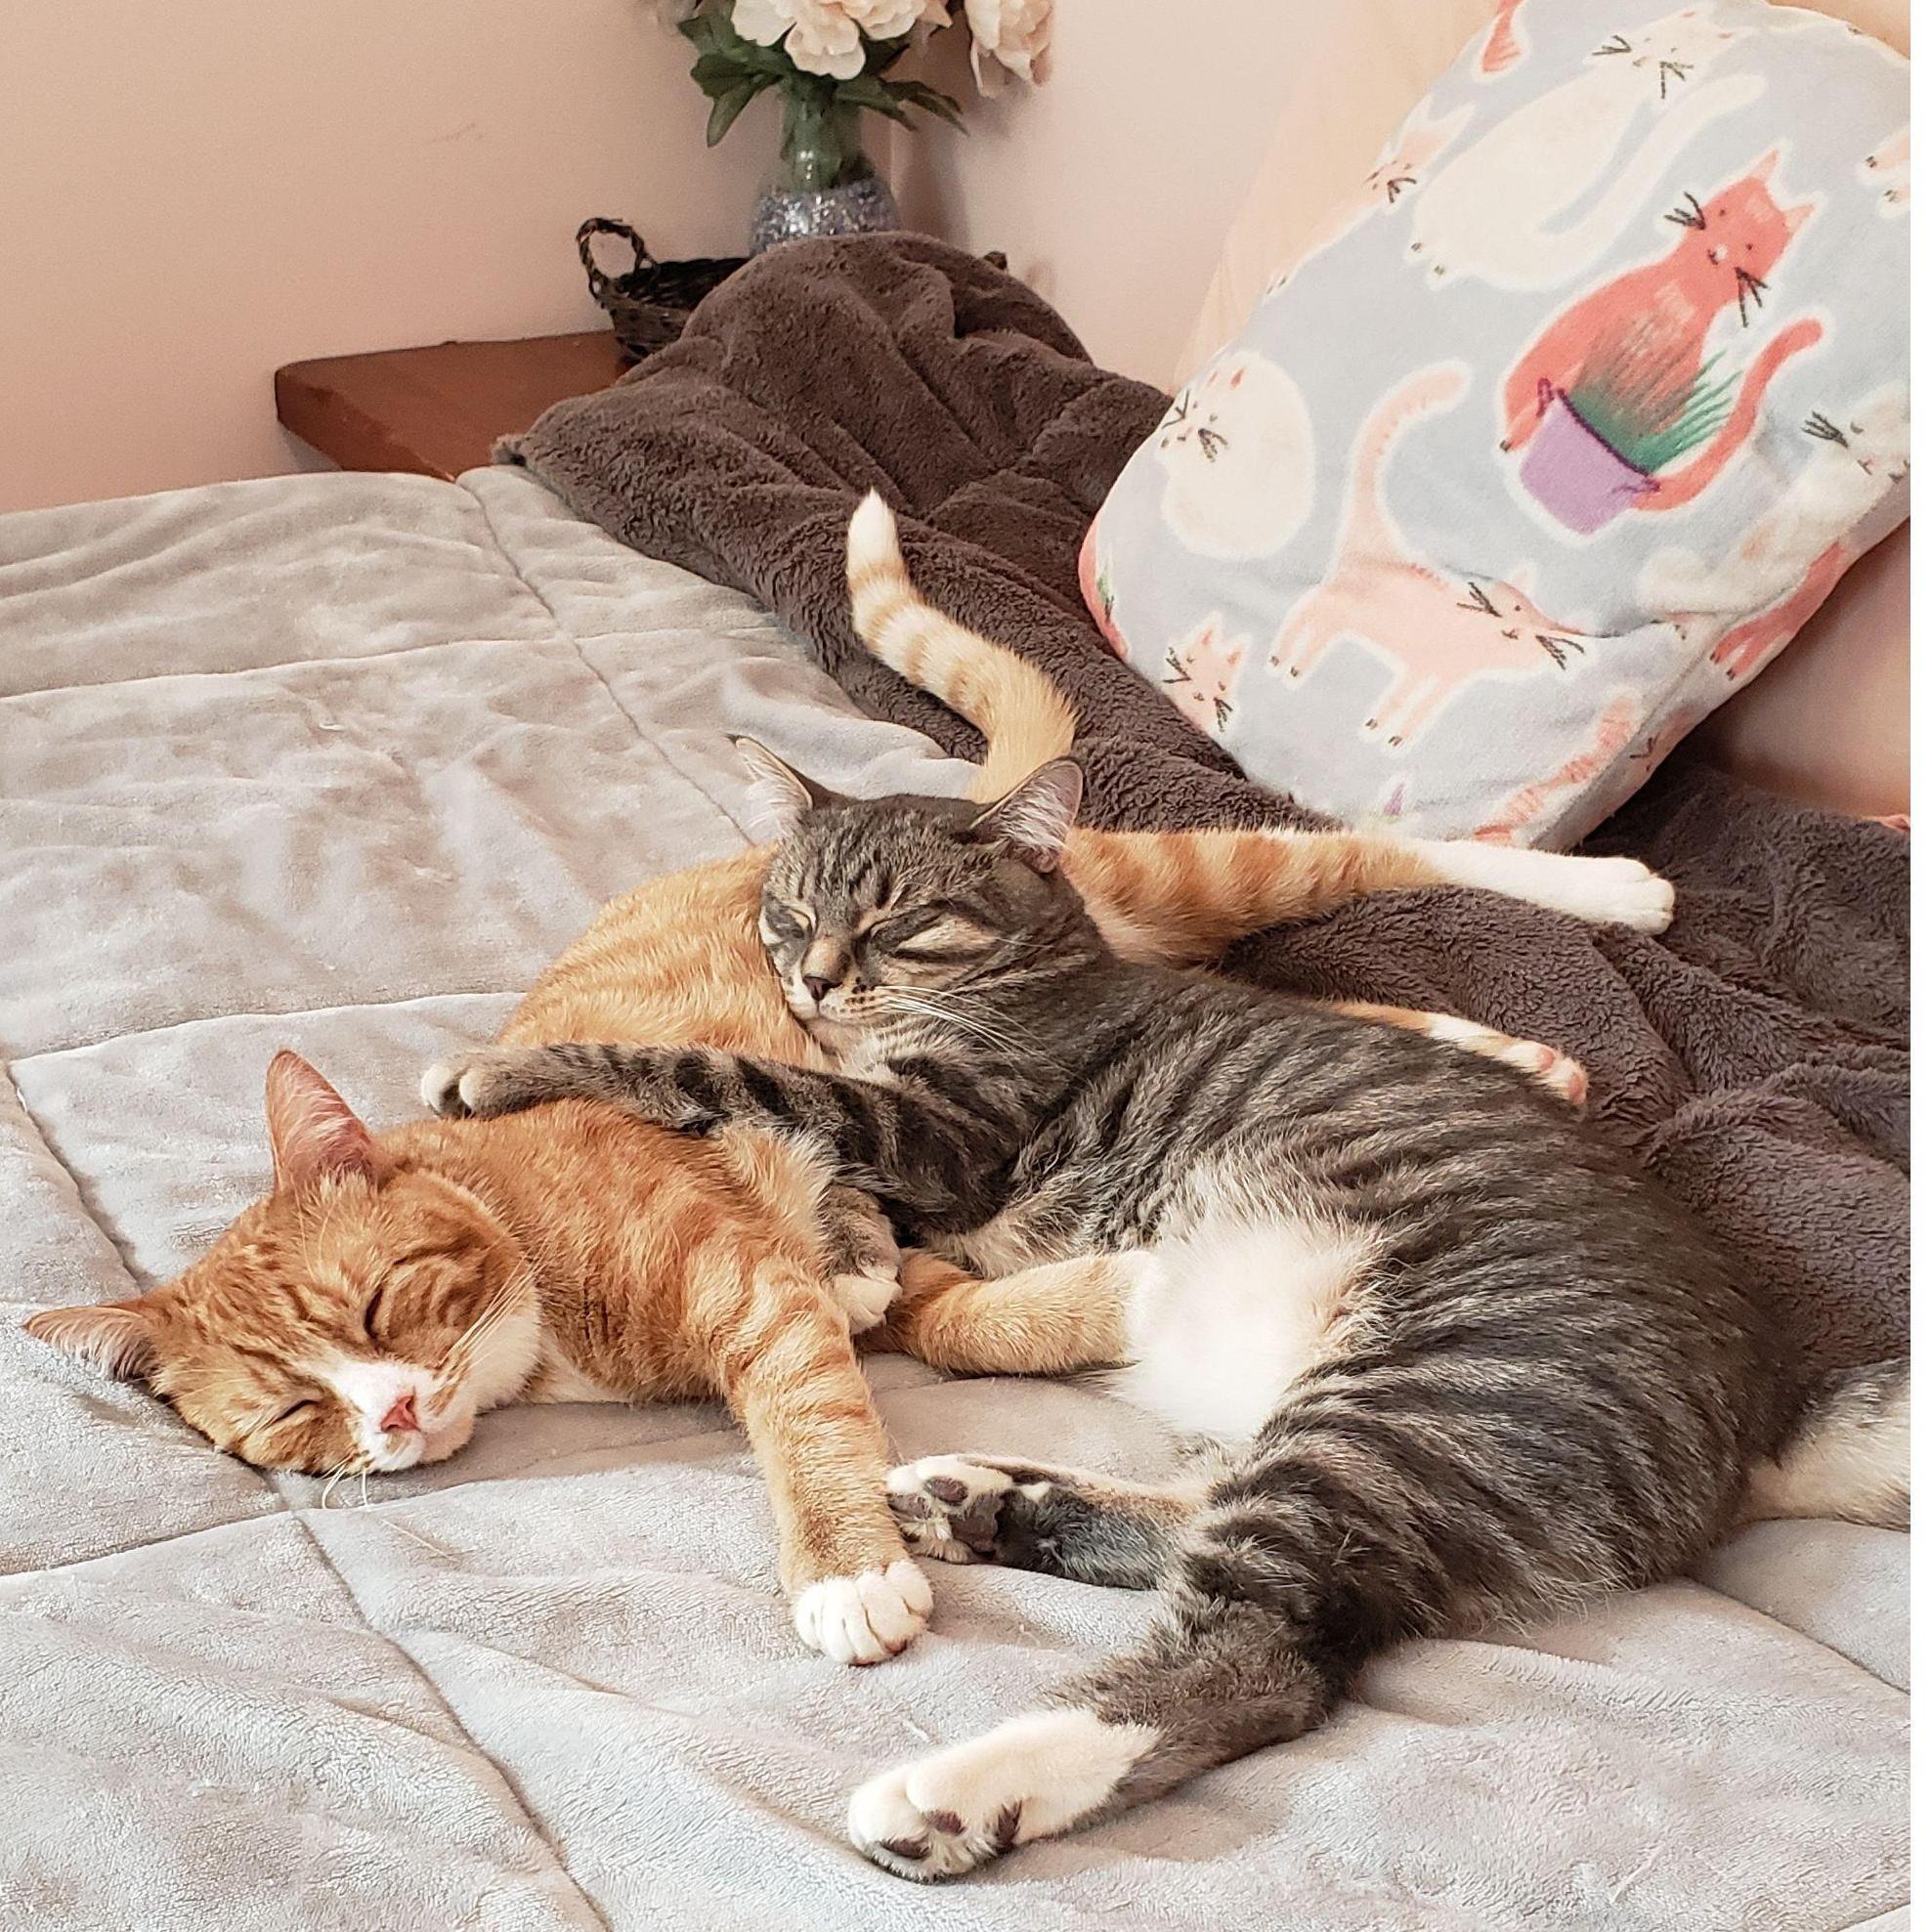 Even now that Mango and Ash are grown cats, they still love to cuddle each other.